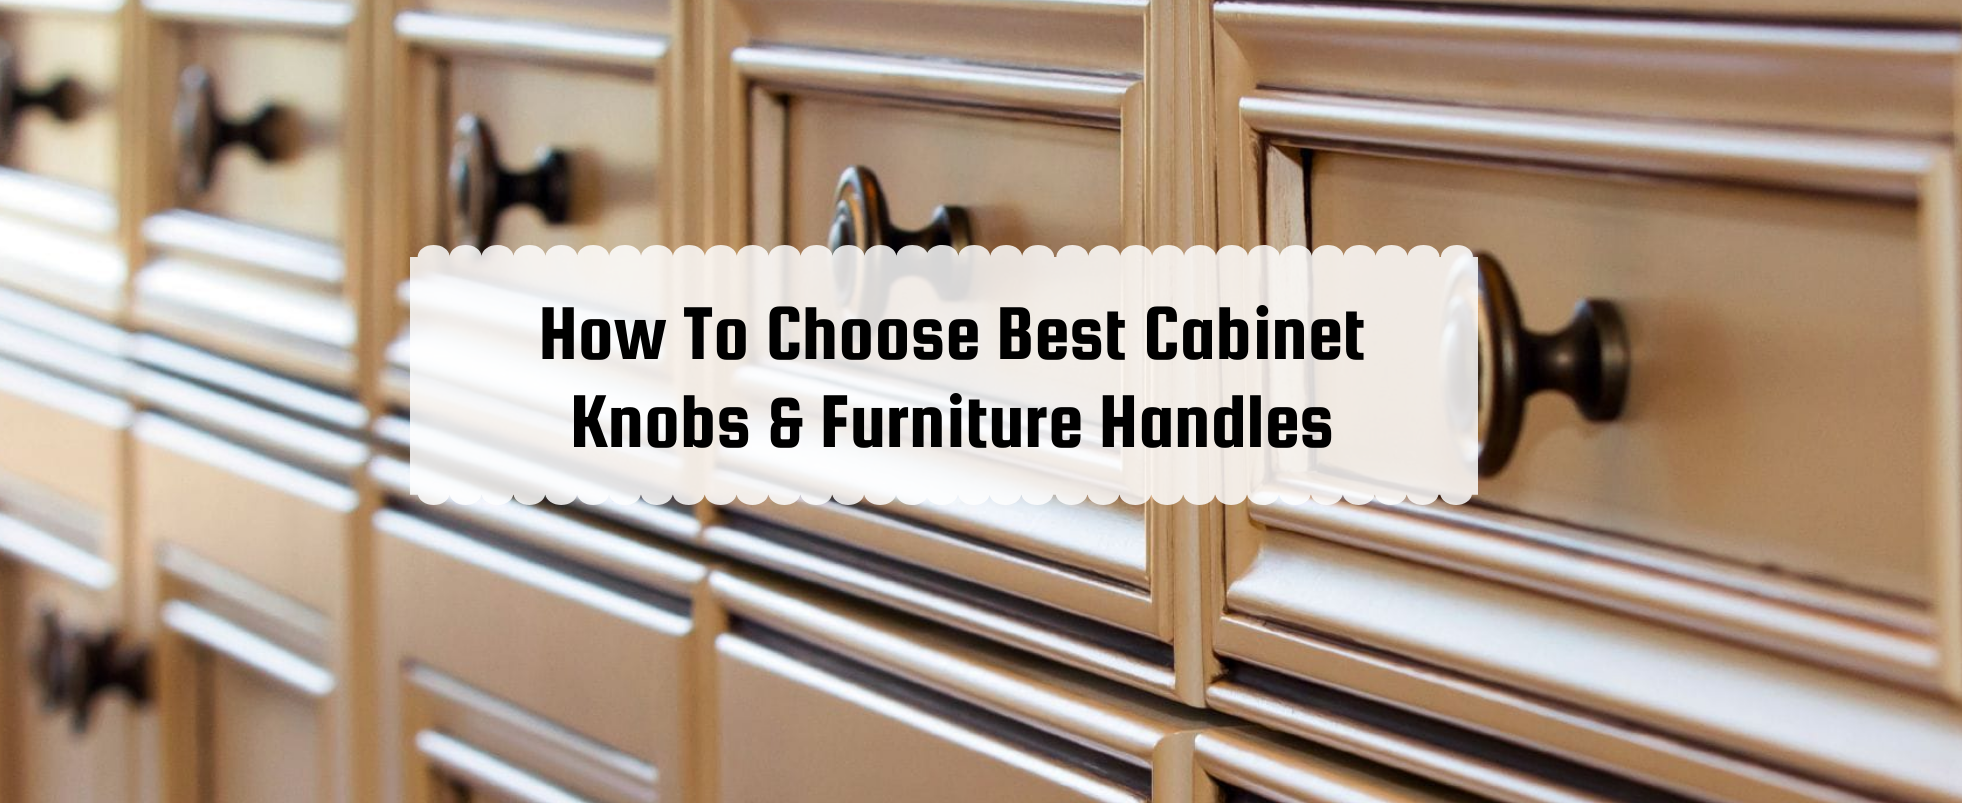 How To Choose Best Cabinet Knobs & Furniture Handles